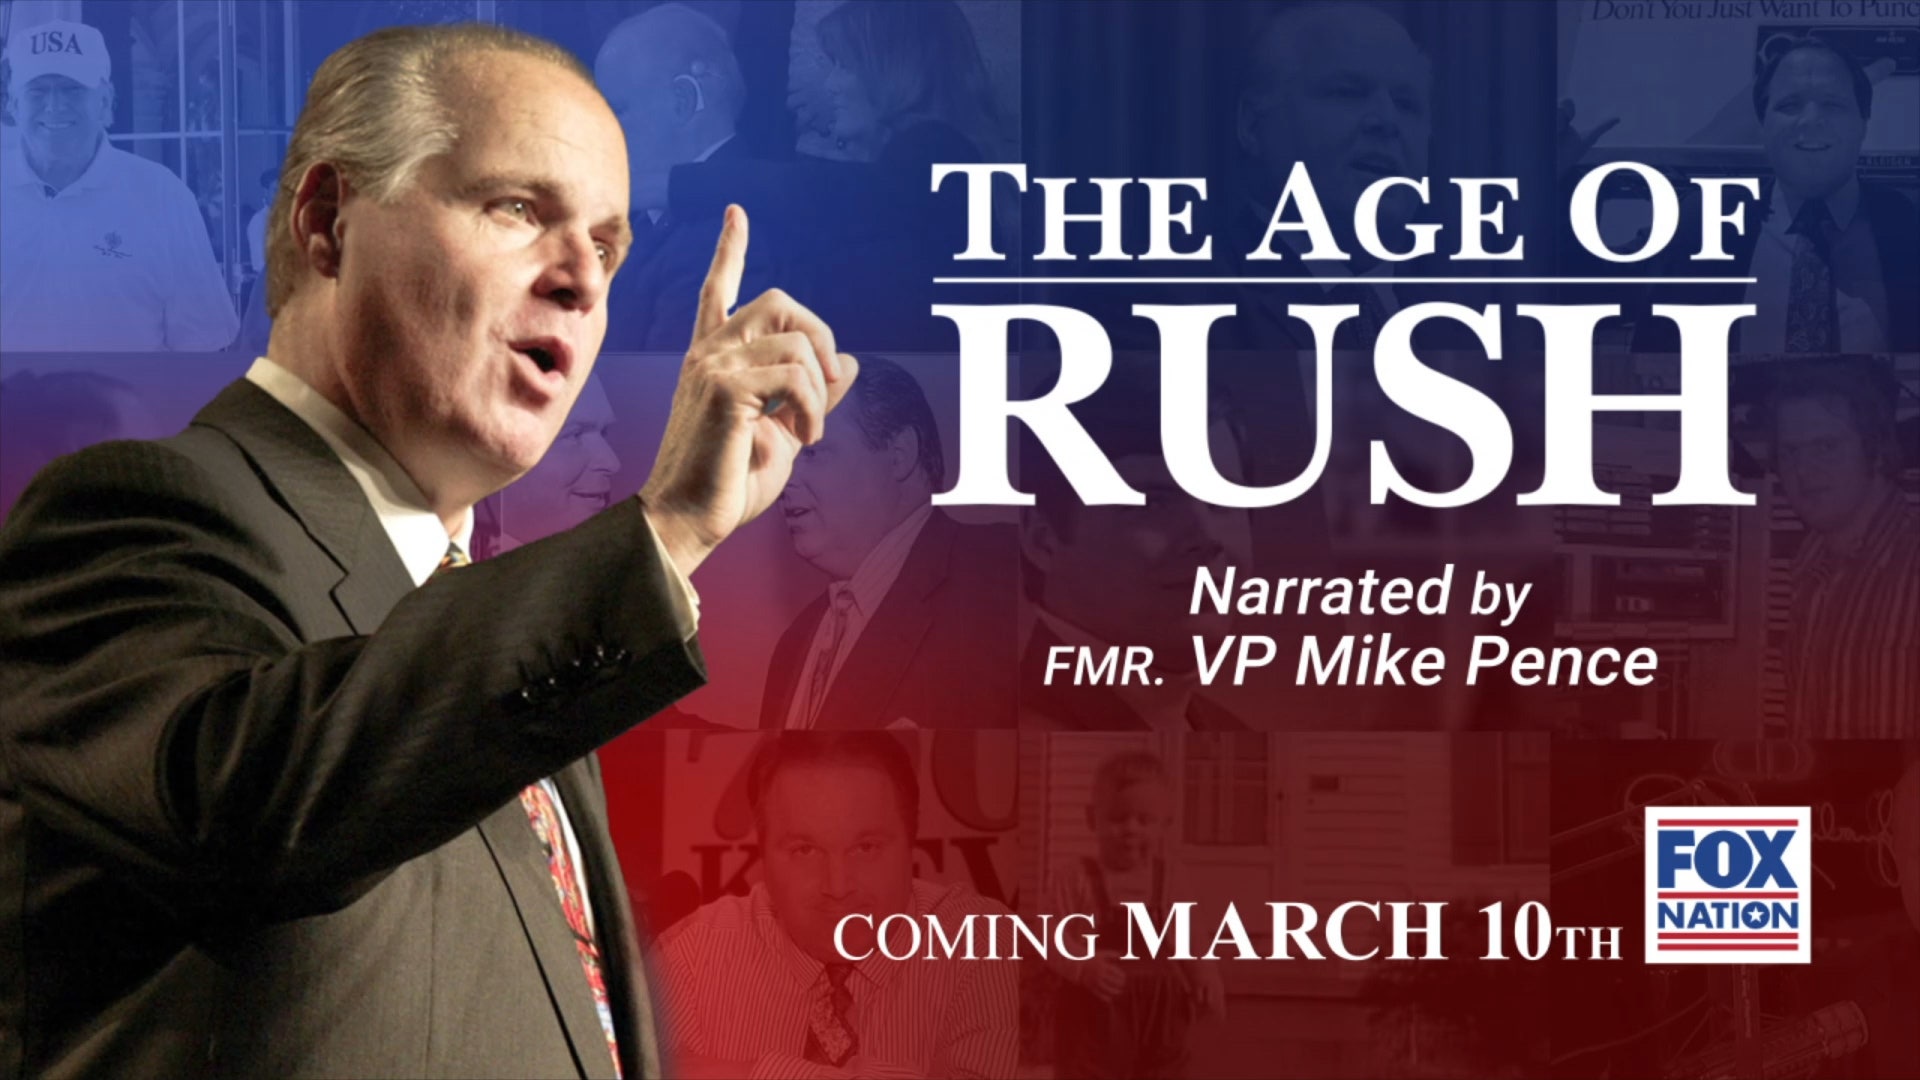 Former Vp Pence Narrates The Age Of Rush A Look At The Man Behind The Golden Microphone Fox